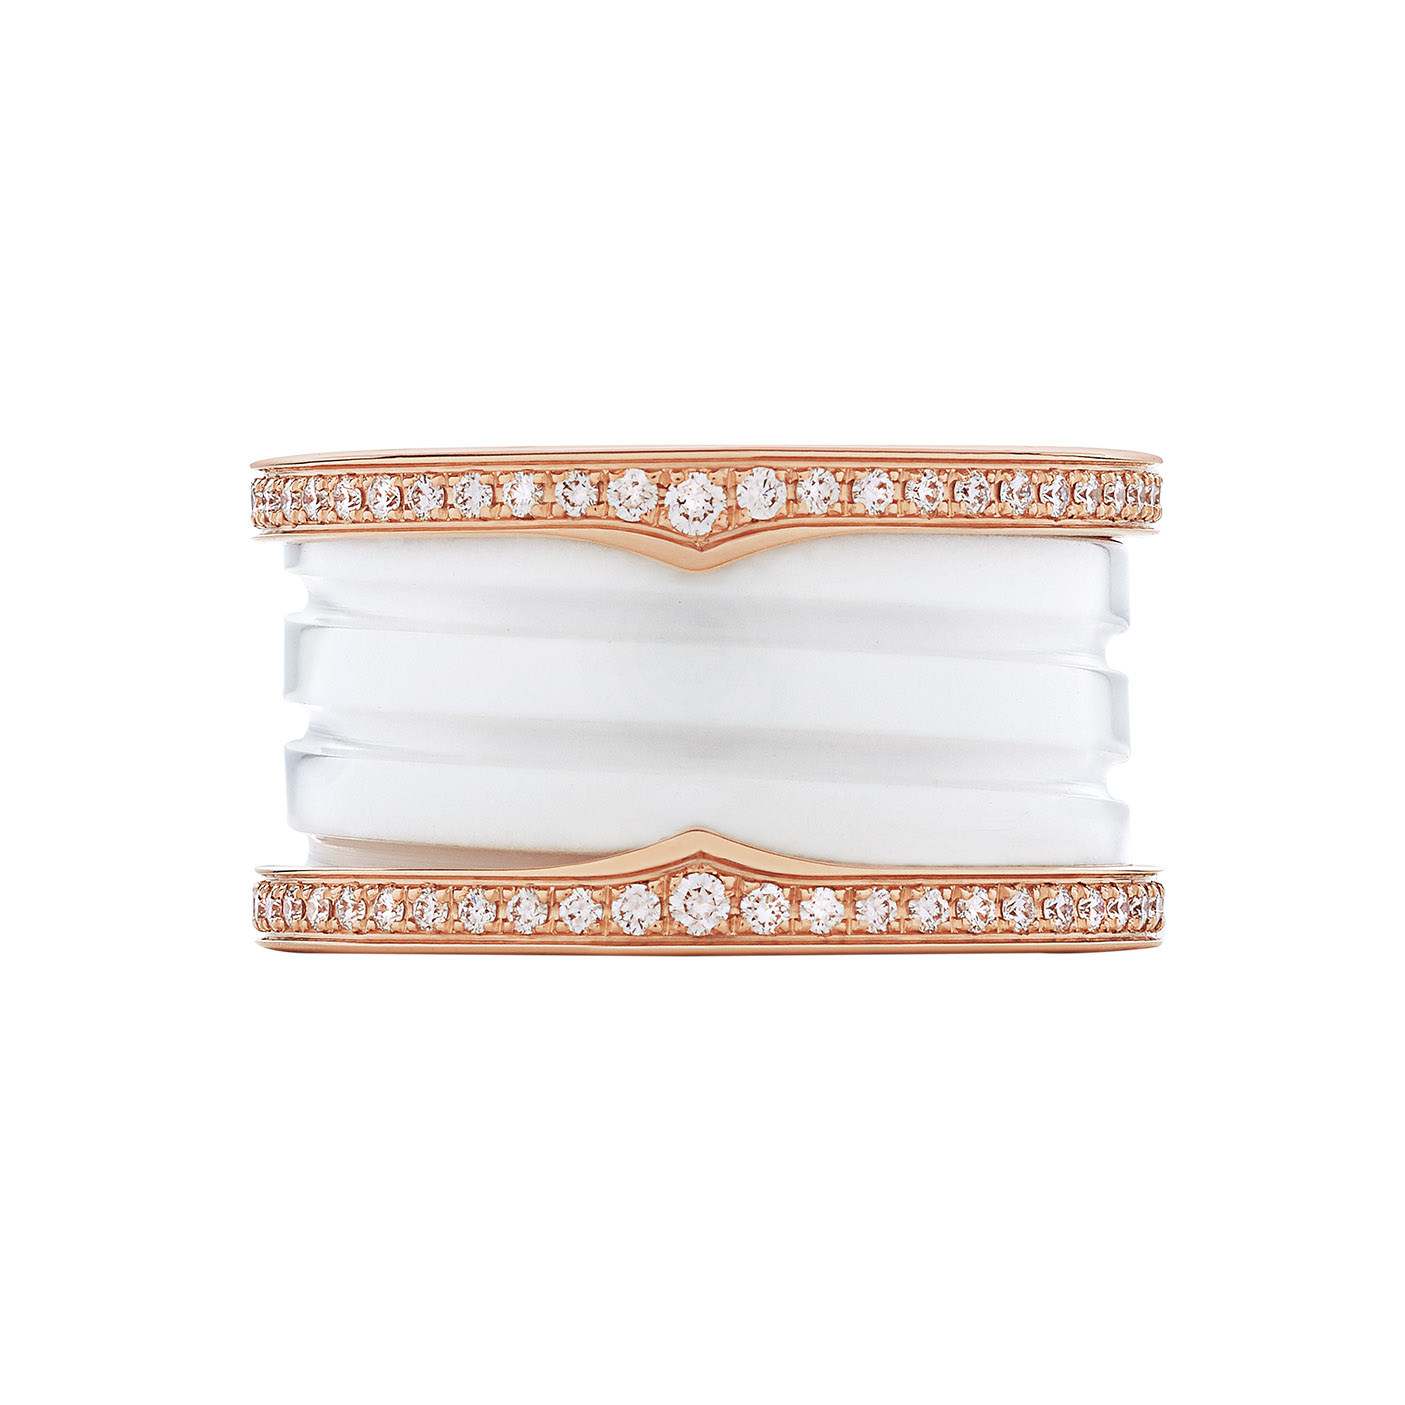 Wholesale OEM women ring in OEM/ODM Jewelry white ceramic and 18k rose gold vermeil on 925 silver jewelry manufacturer